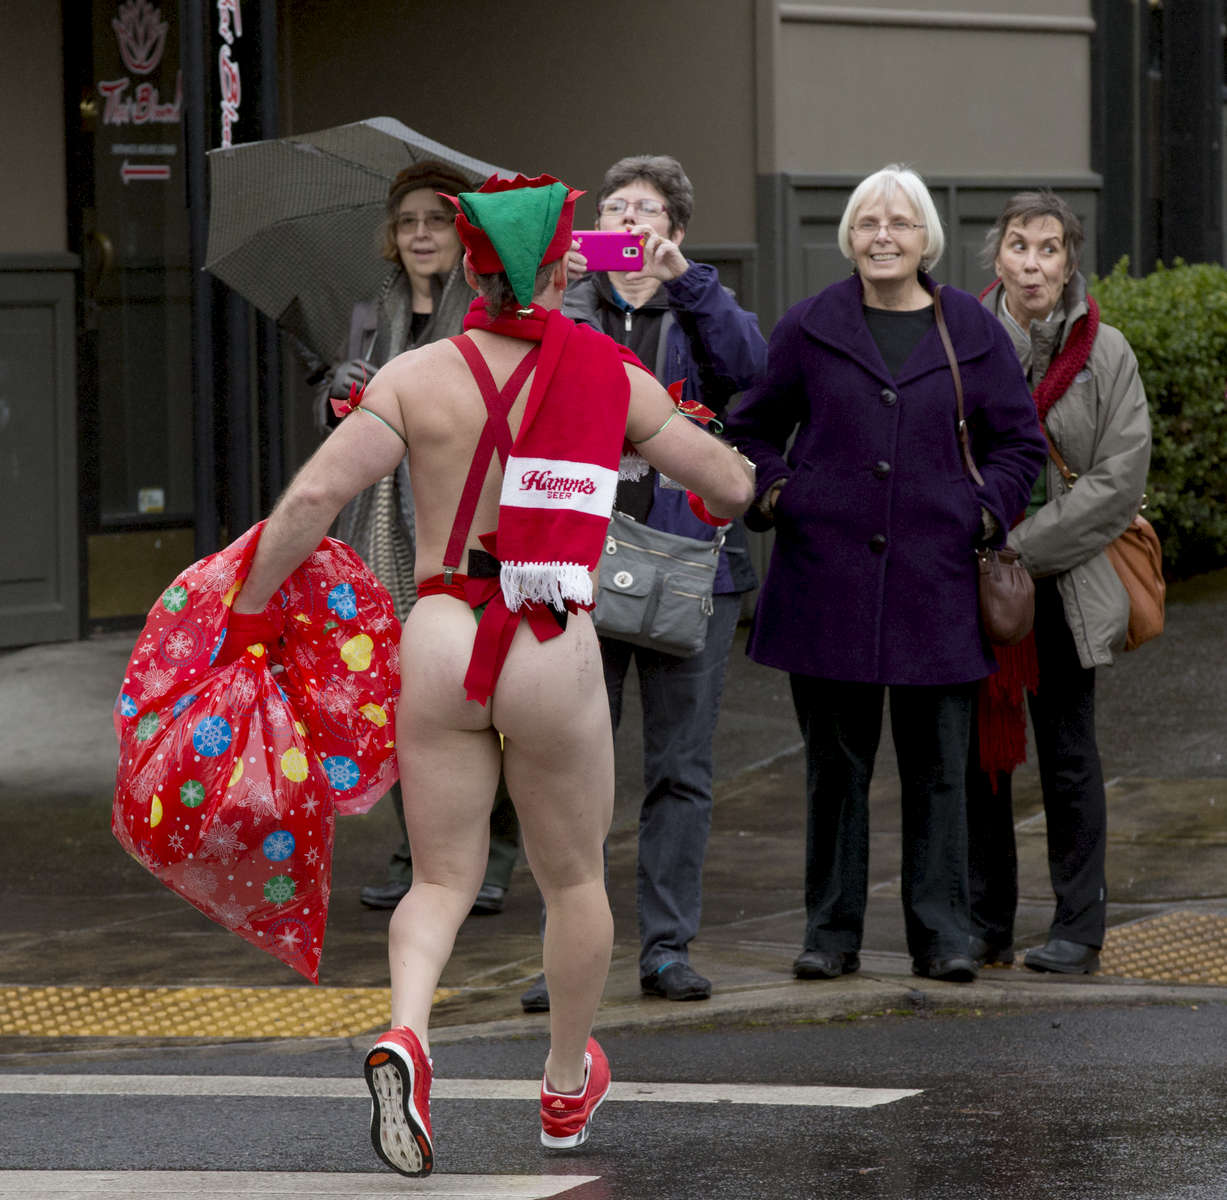 A Santa Speedo participant brings holiday cheer to onlookers as he runs through the streets in northwest Portland in 2014 during the Santa Speedo Run. The event is a fundraiser for the non-profit Ethiopia Project and raised $3000 dollars with the run.